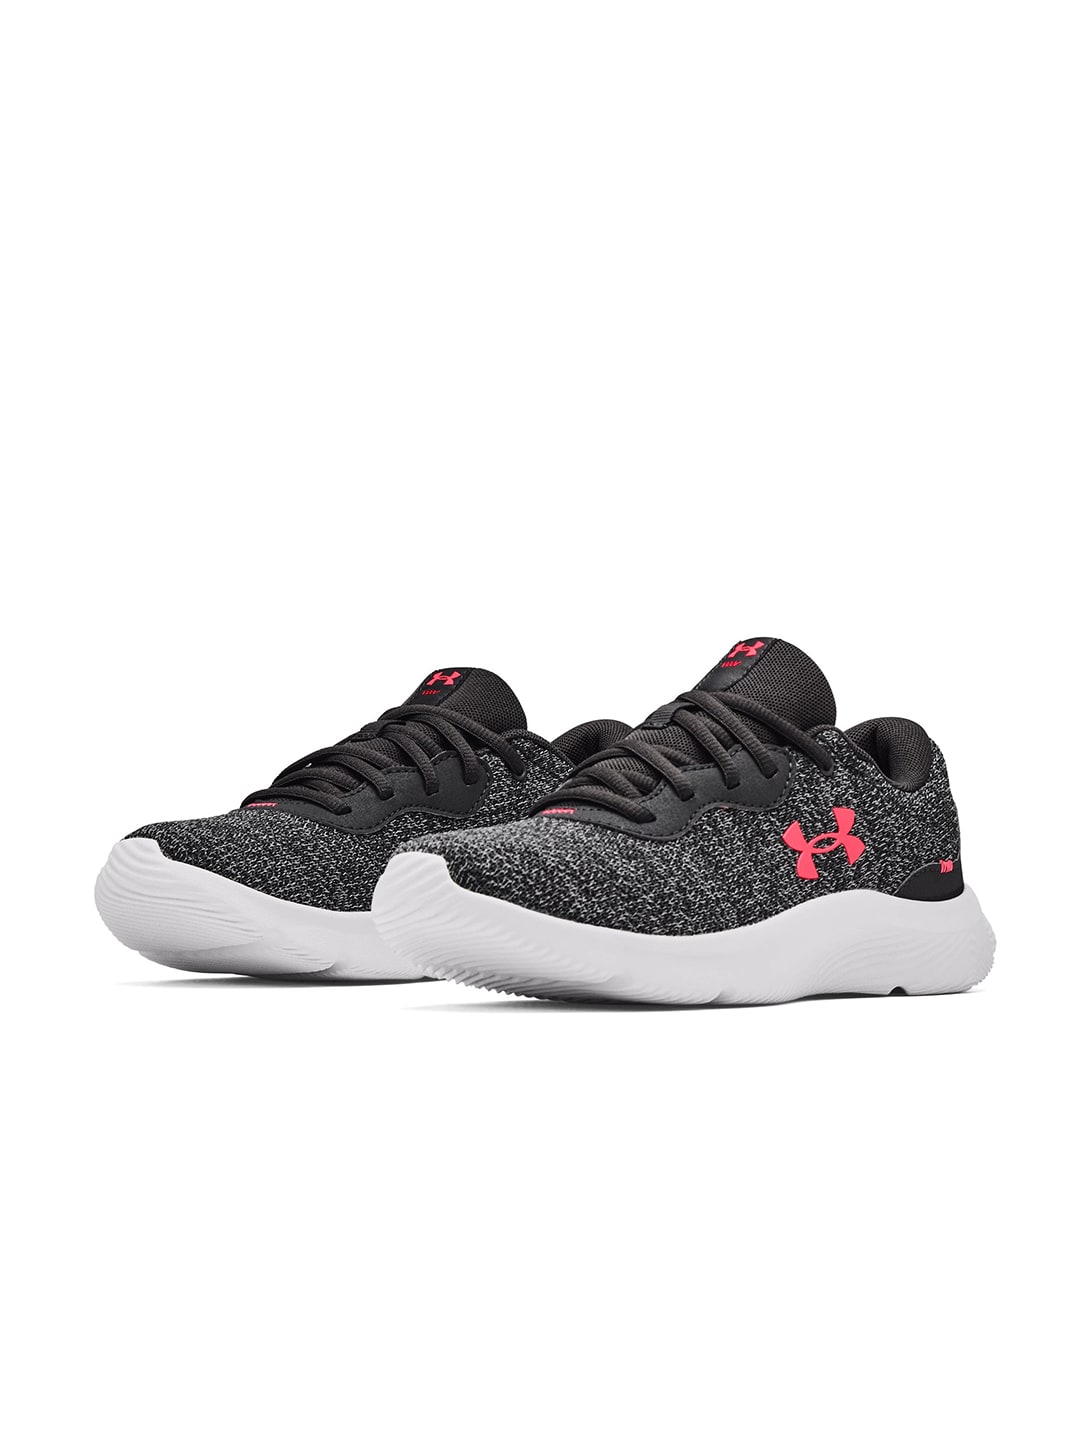 UNDER ARMOUR Women Charcoal Mojo 2 Running Shoes Price in India